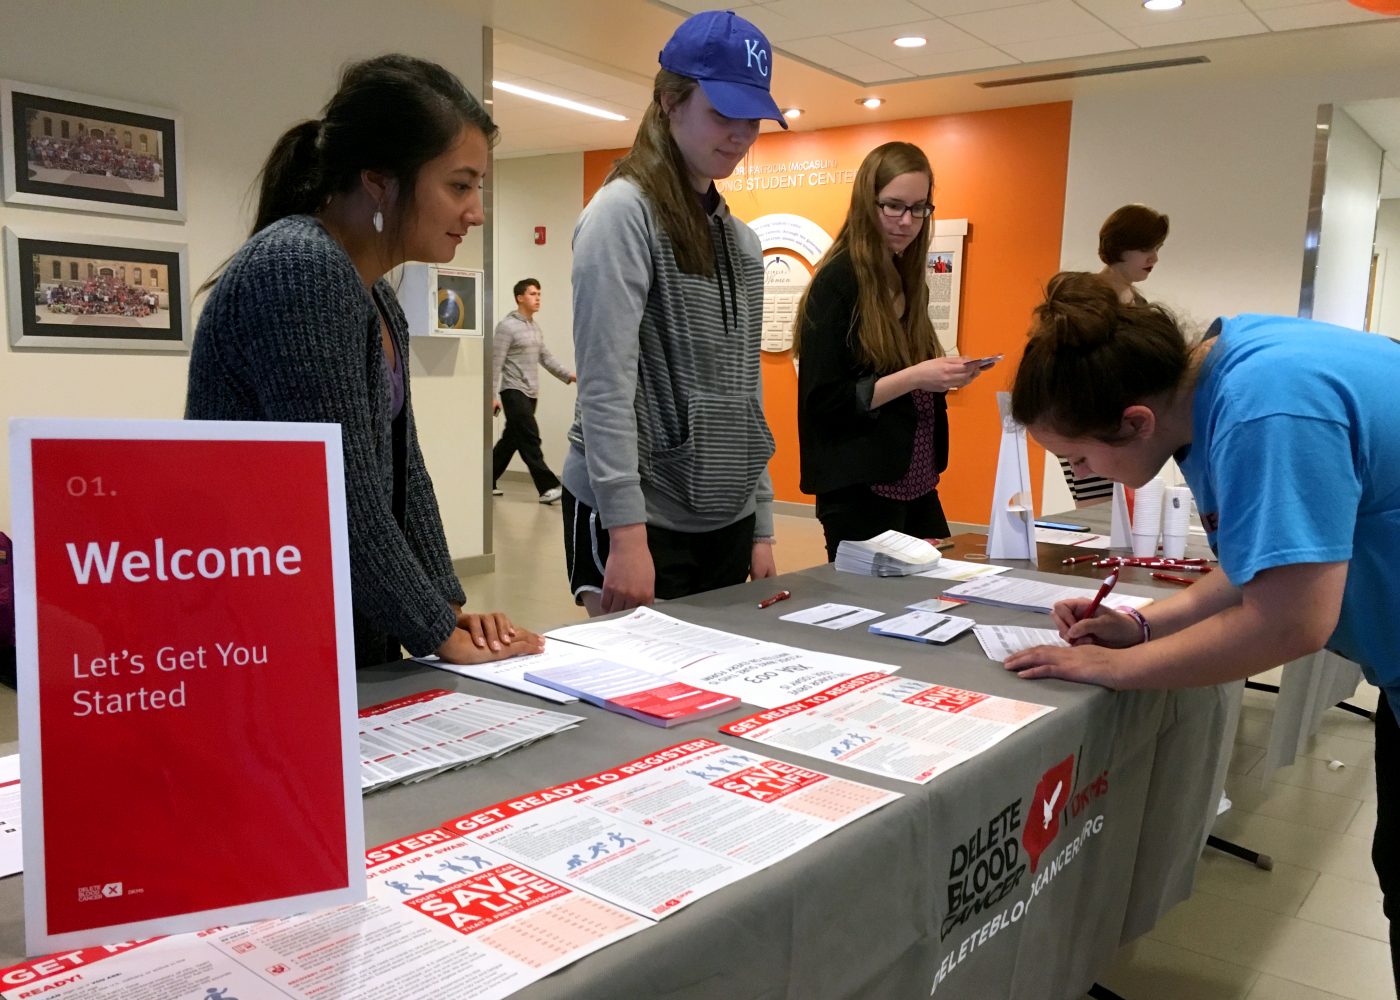 Graduate Assistant Gabby Garrison and freshman Emily Riggs help freshman Kendall Stelting sign up to be a bone marrow donor on March 8 in the Long Student Center. The chance of being a match is rare, but could help save the life of someone battling blood cancer.